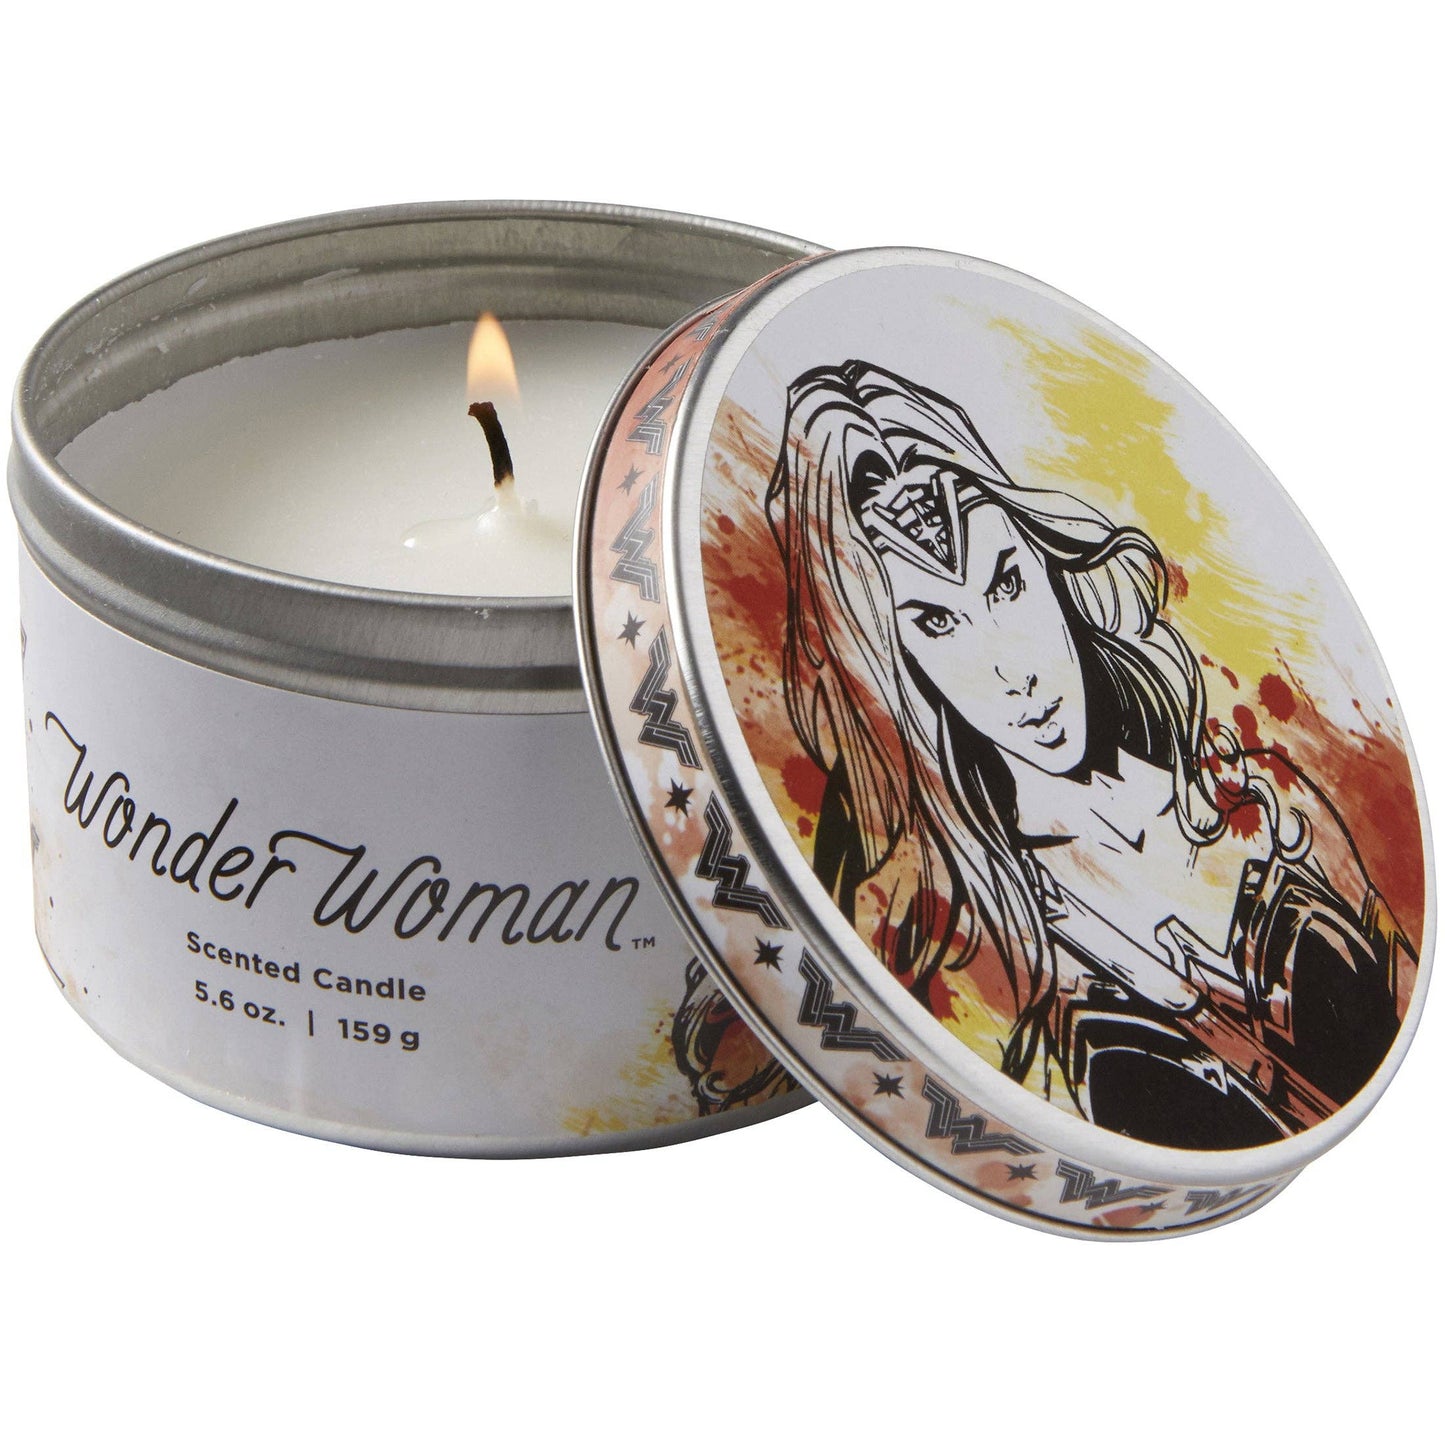 DC Comics Wonder Woman Citrus Scented Candle (5.6 oz.) by Insight Luminaries